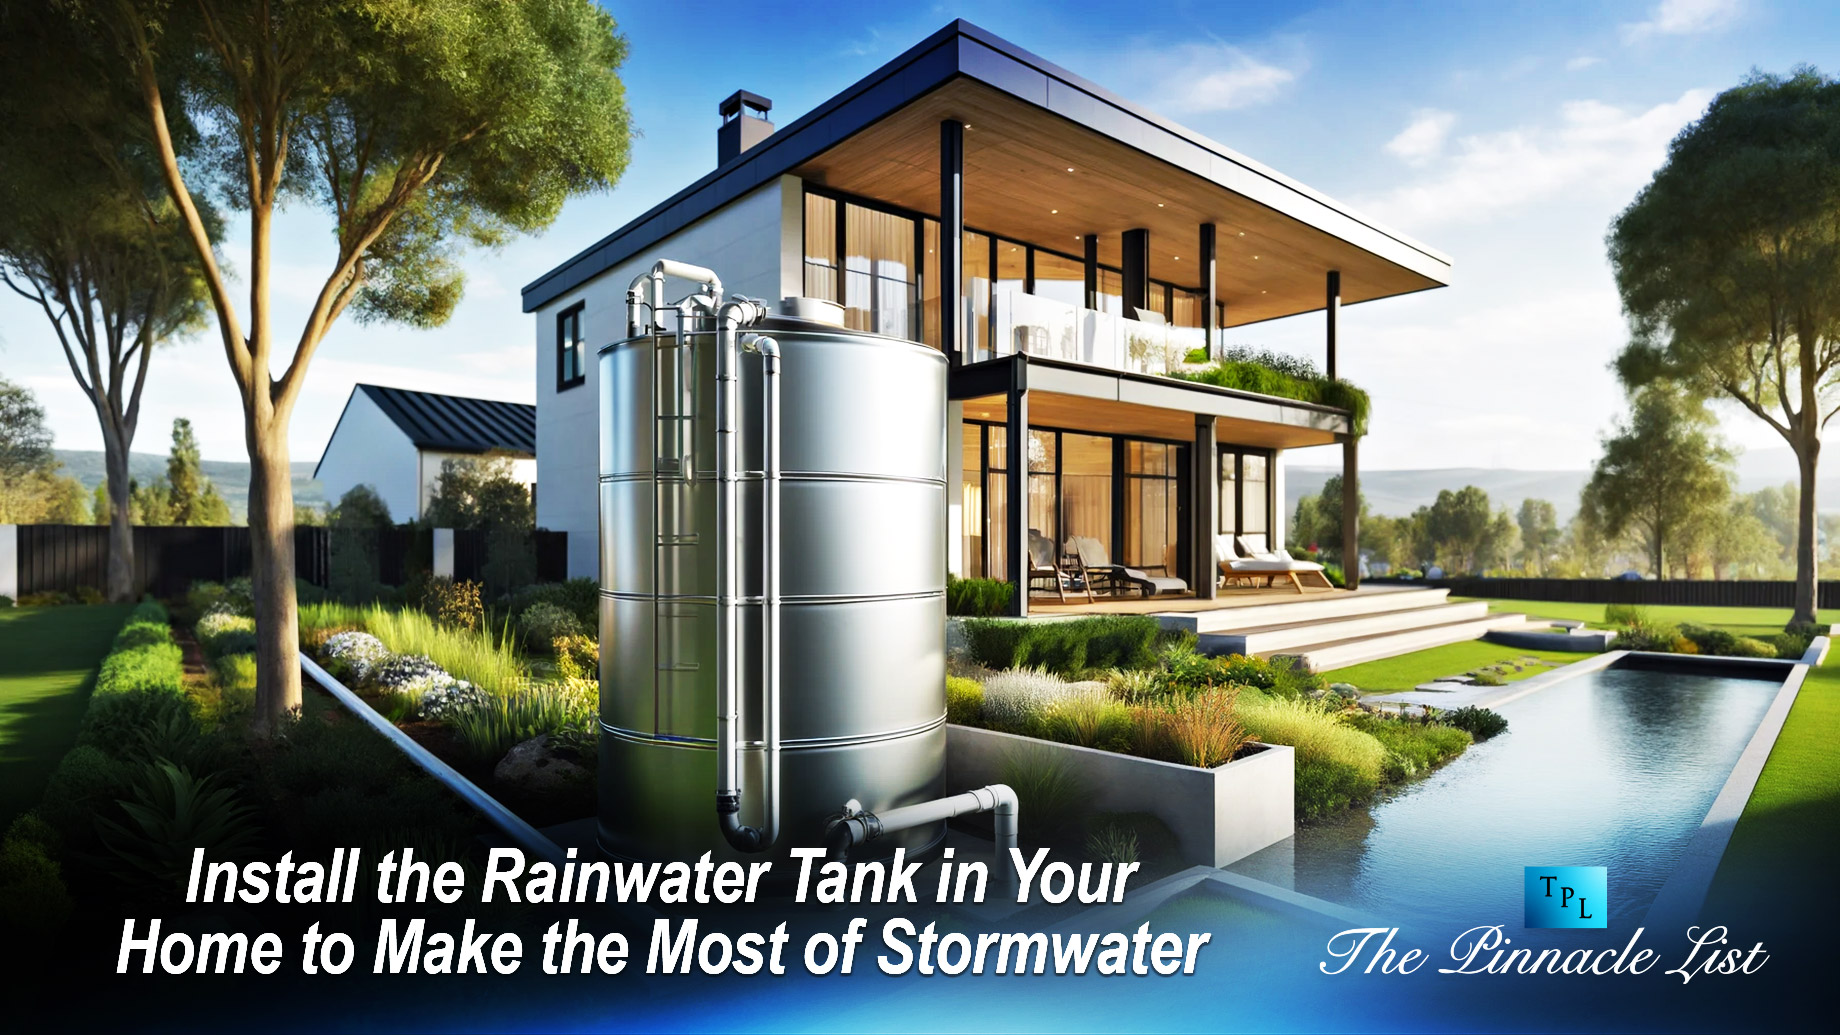 Install the Rainwater Tank in Your Home to Make the Most of Stormwater